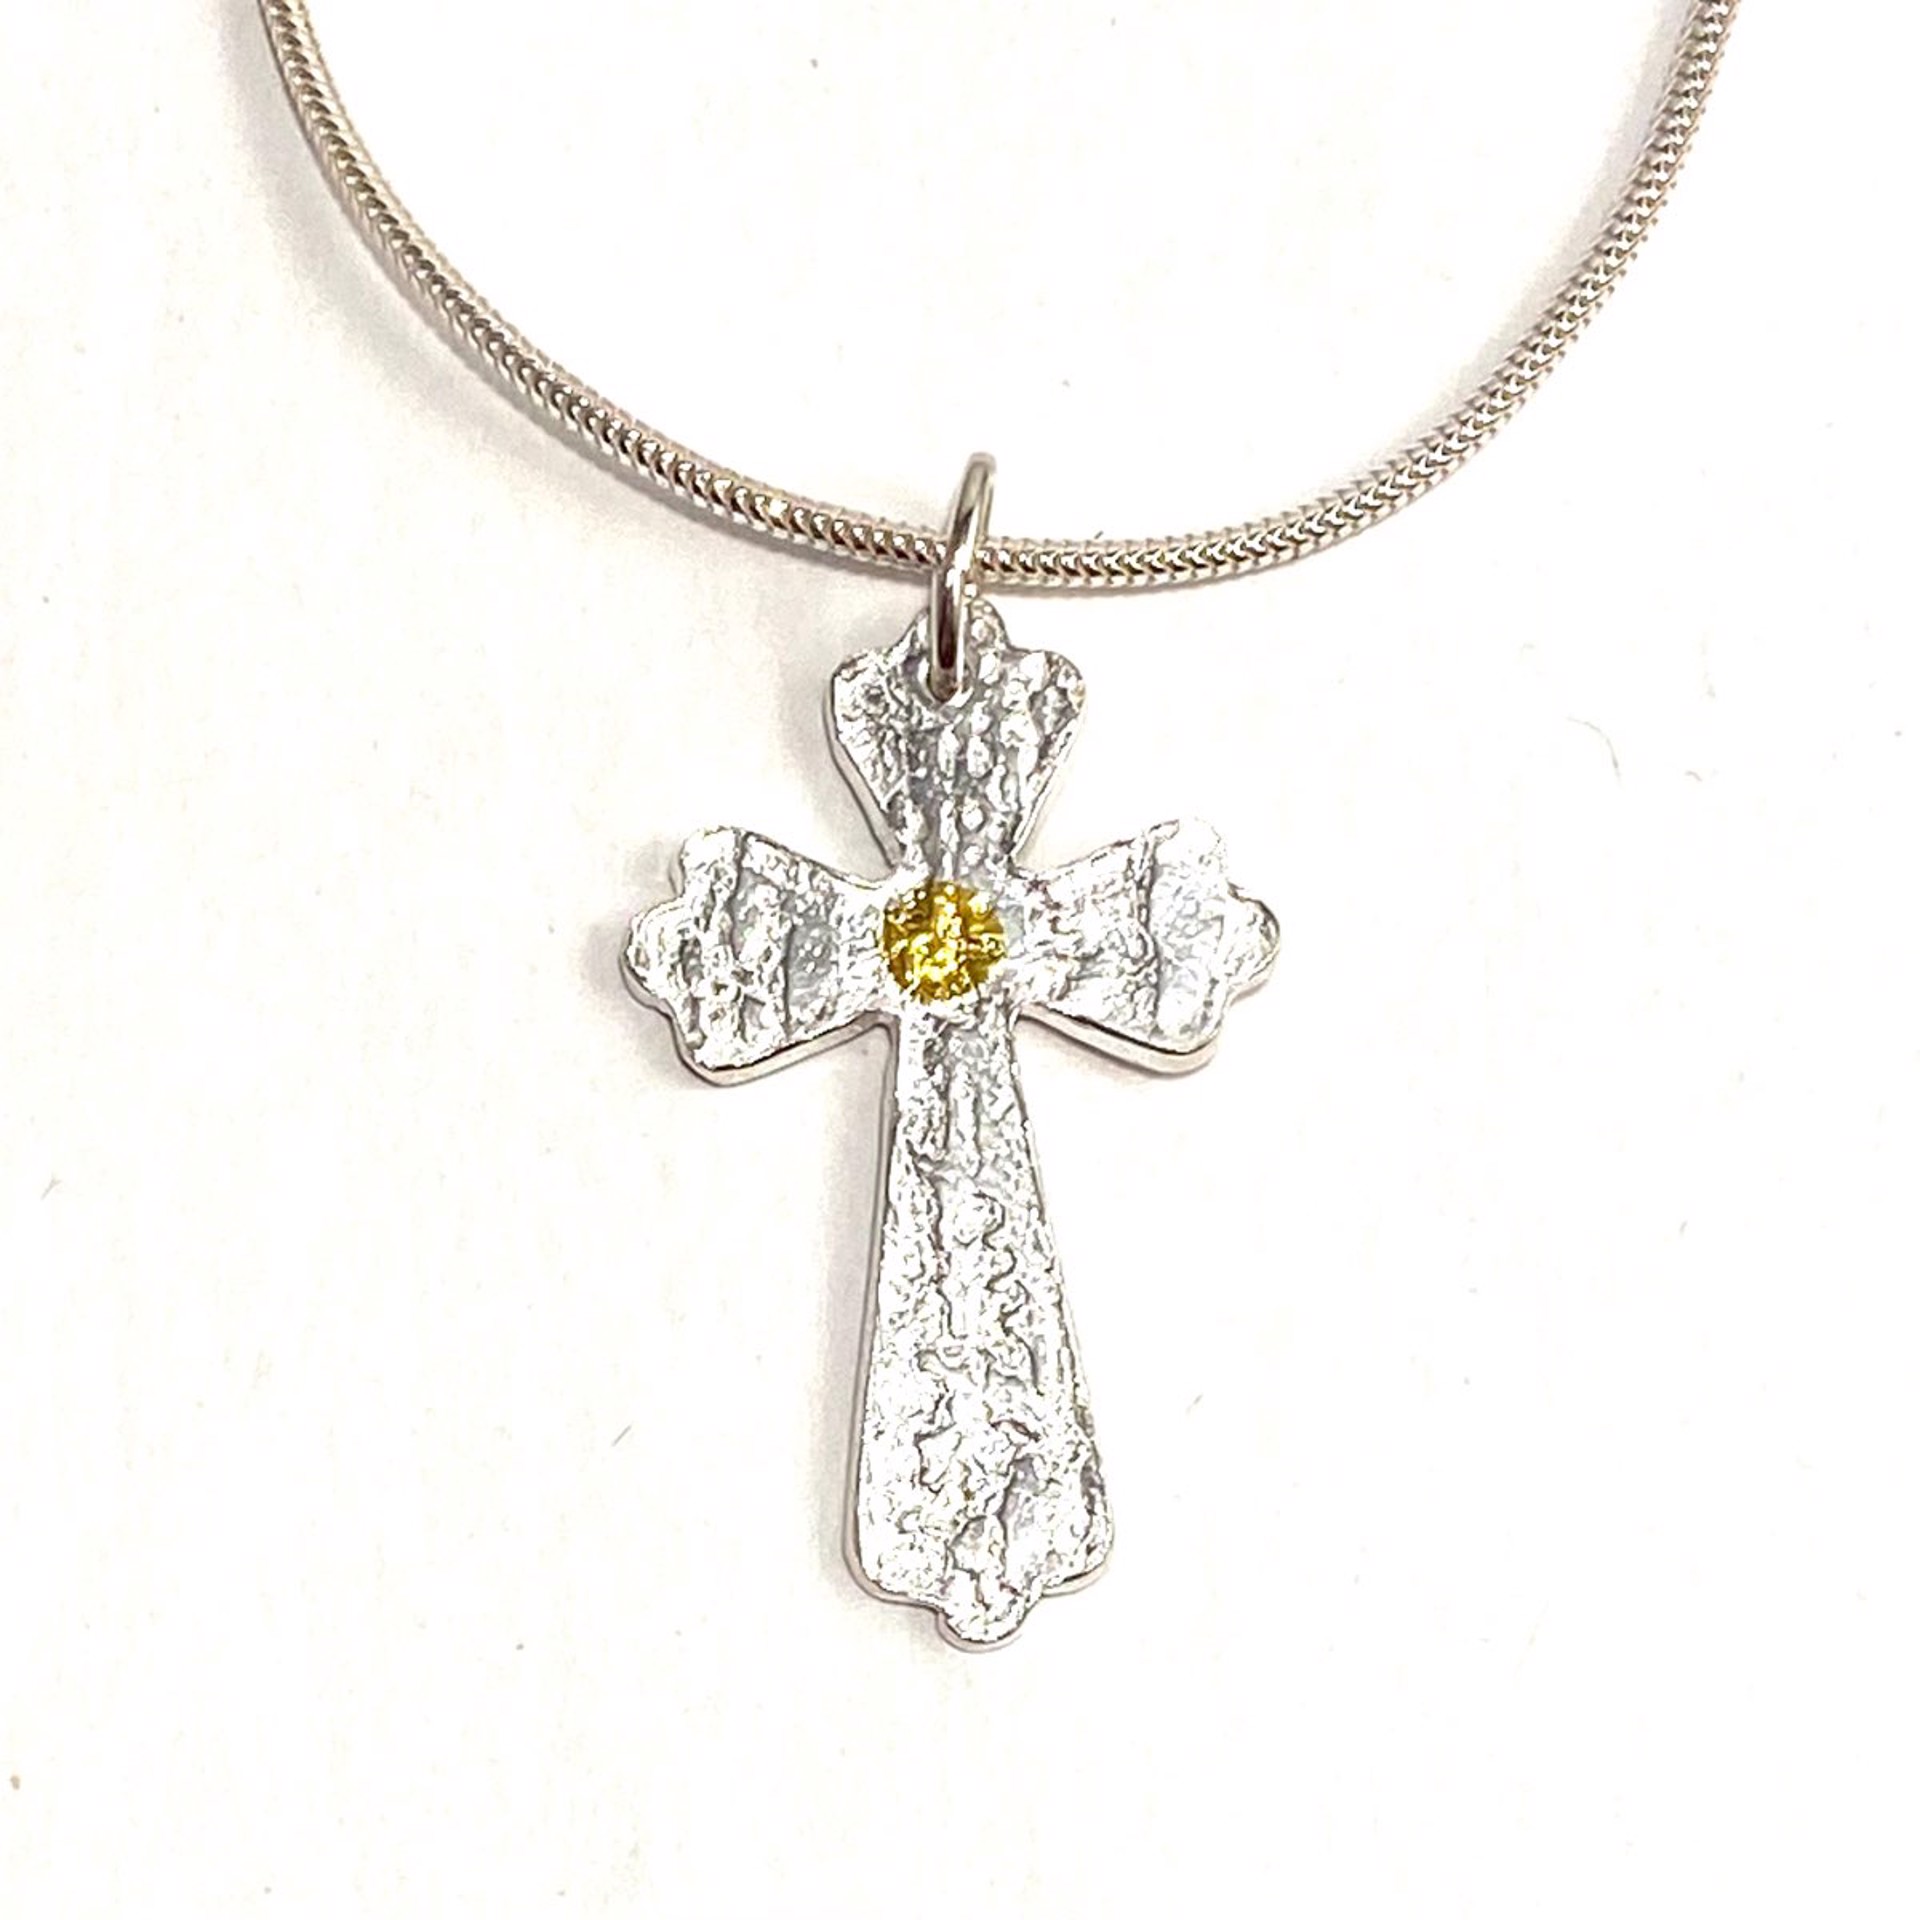 KH22-72 Keum-Boo Fine Silver and Gold Cross Necklace by Karen Hakim